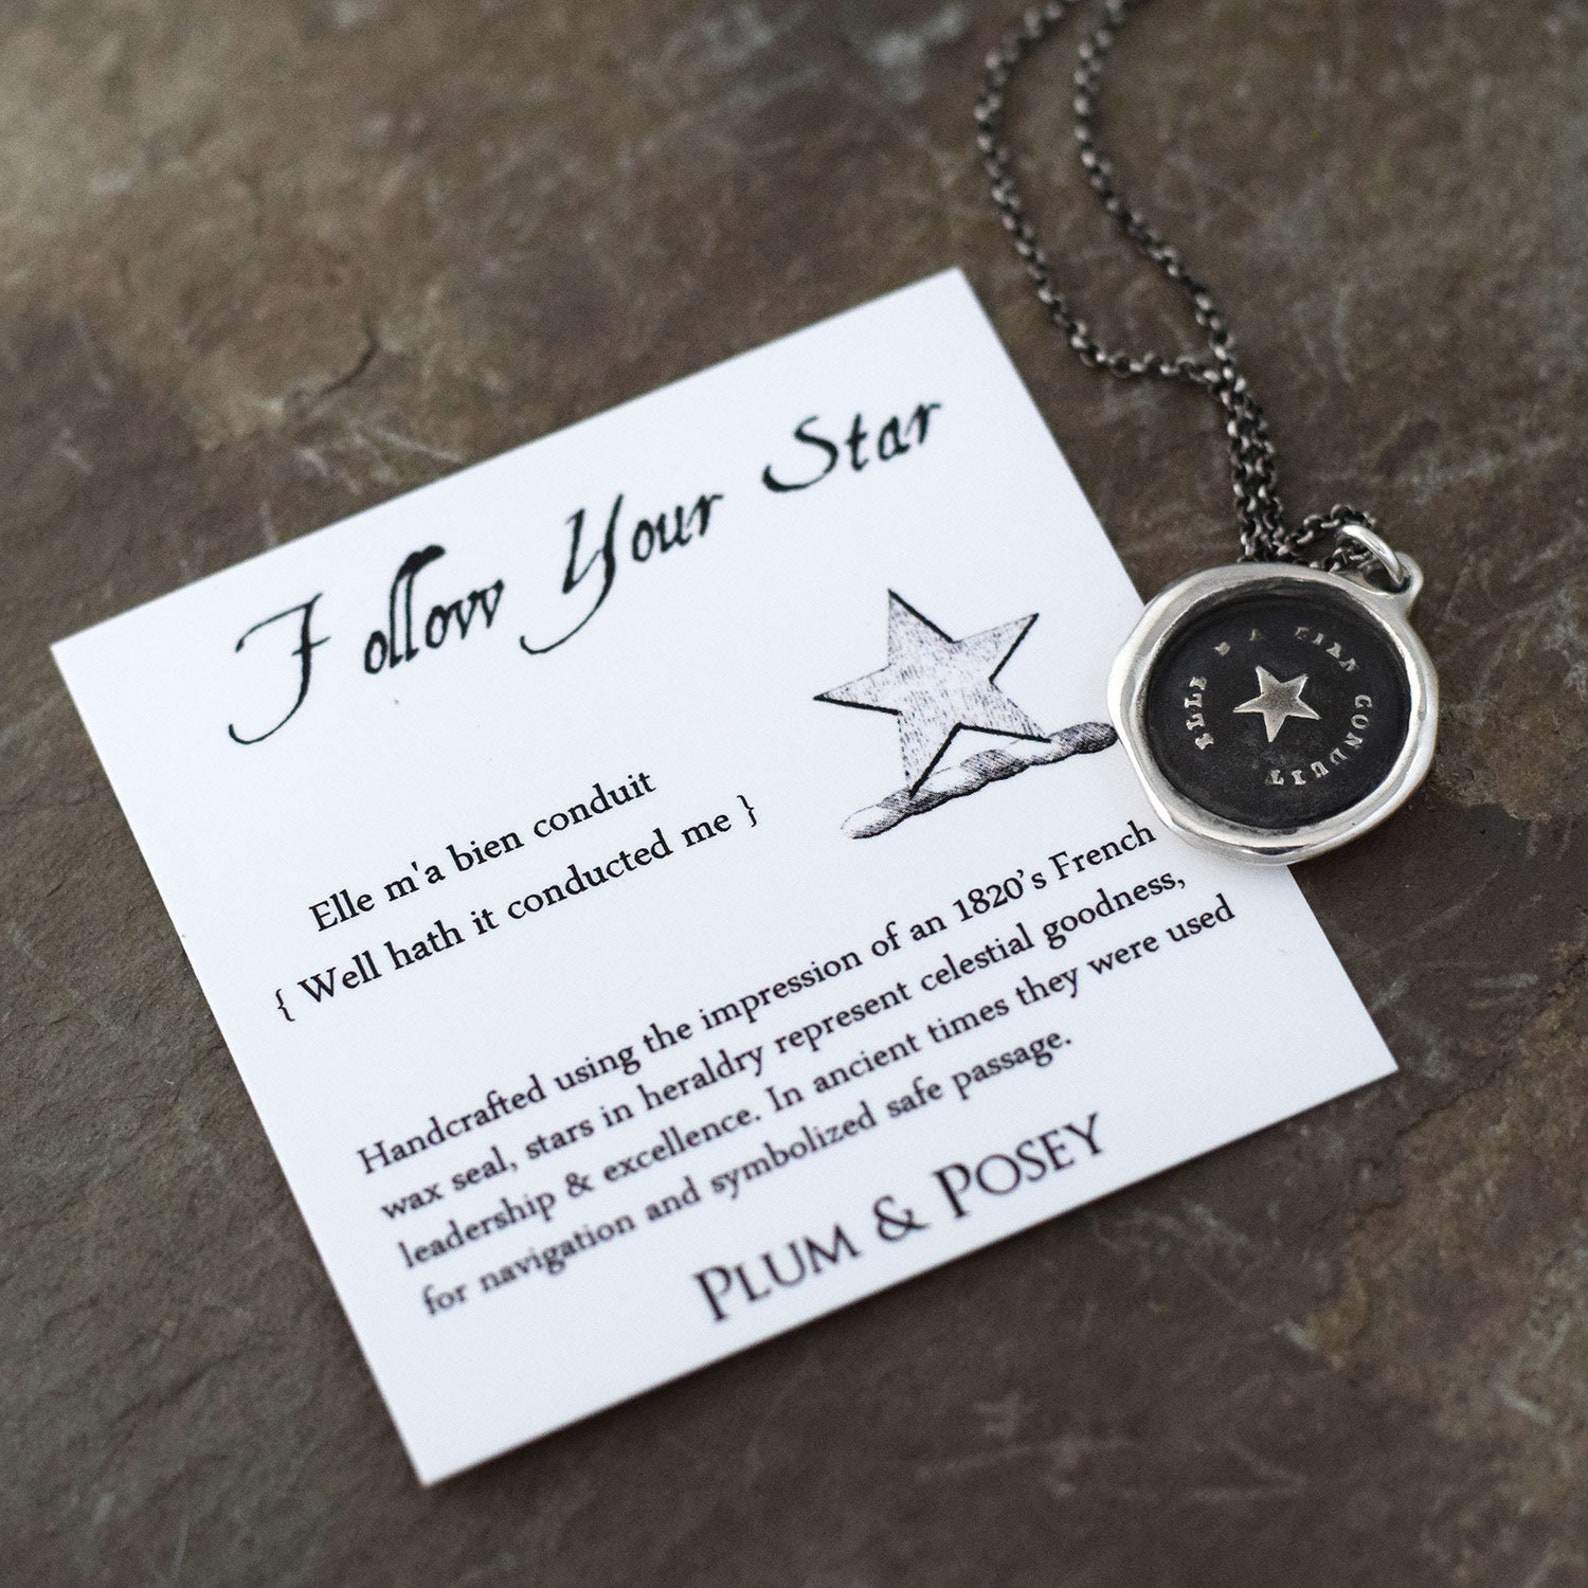 Follow Your Star Antique Wax Seal Necklace 258 - Etsy